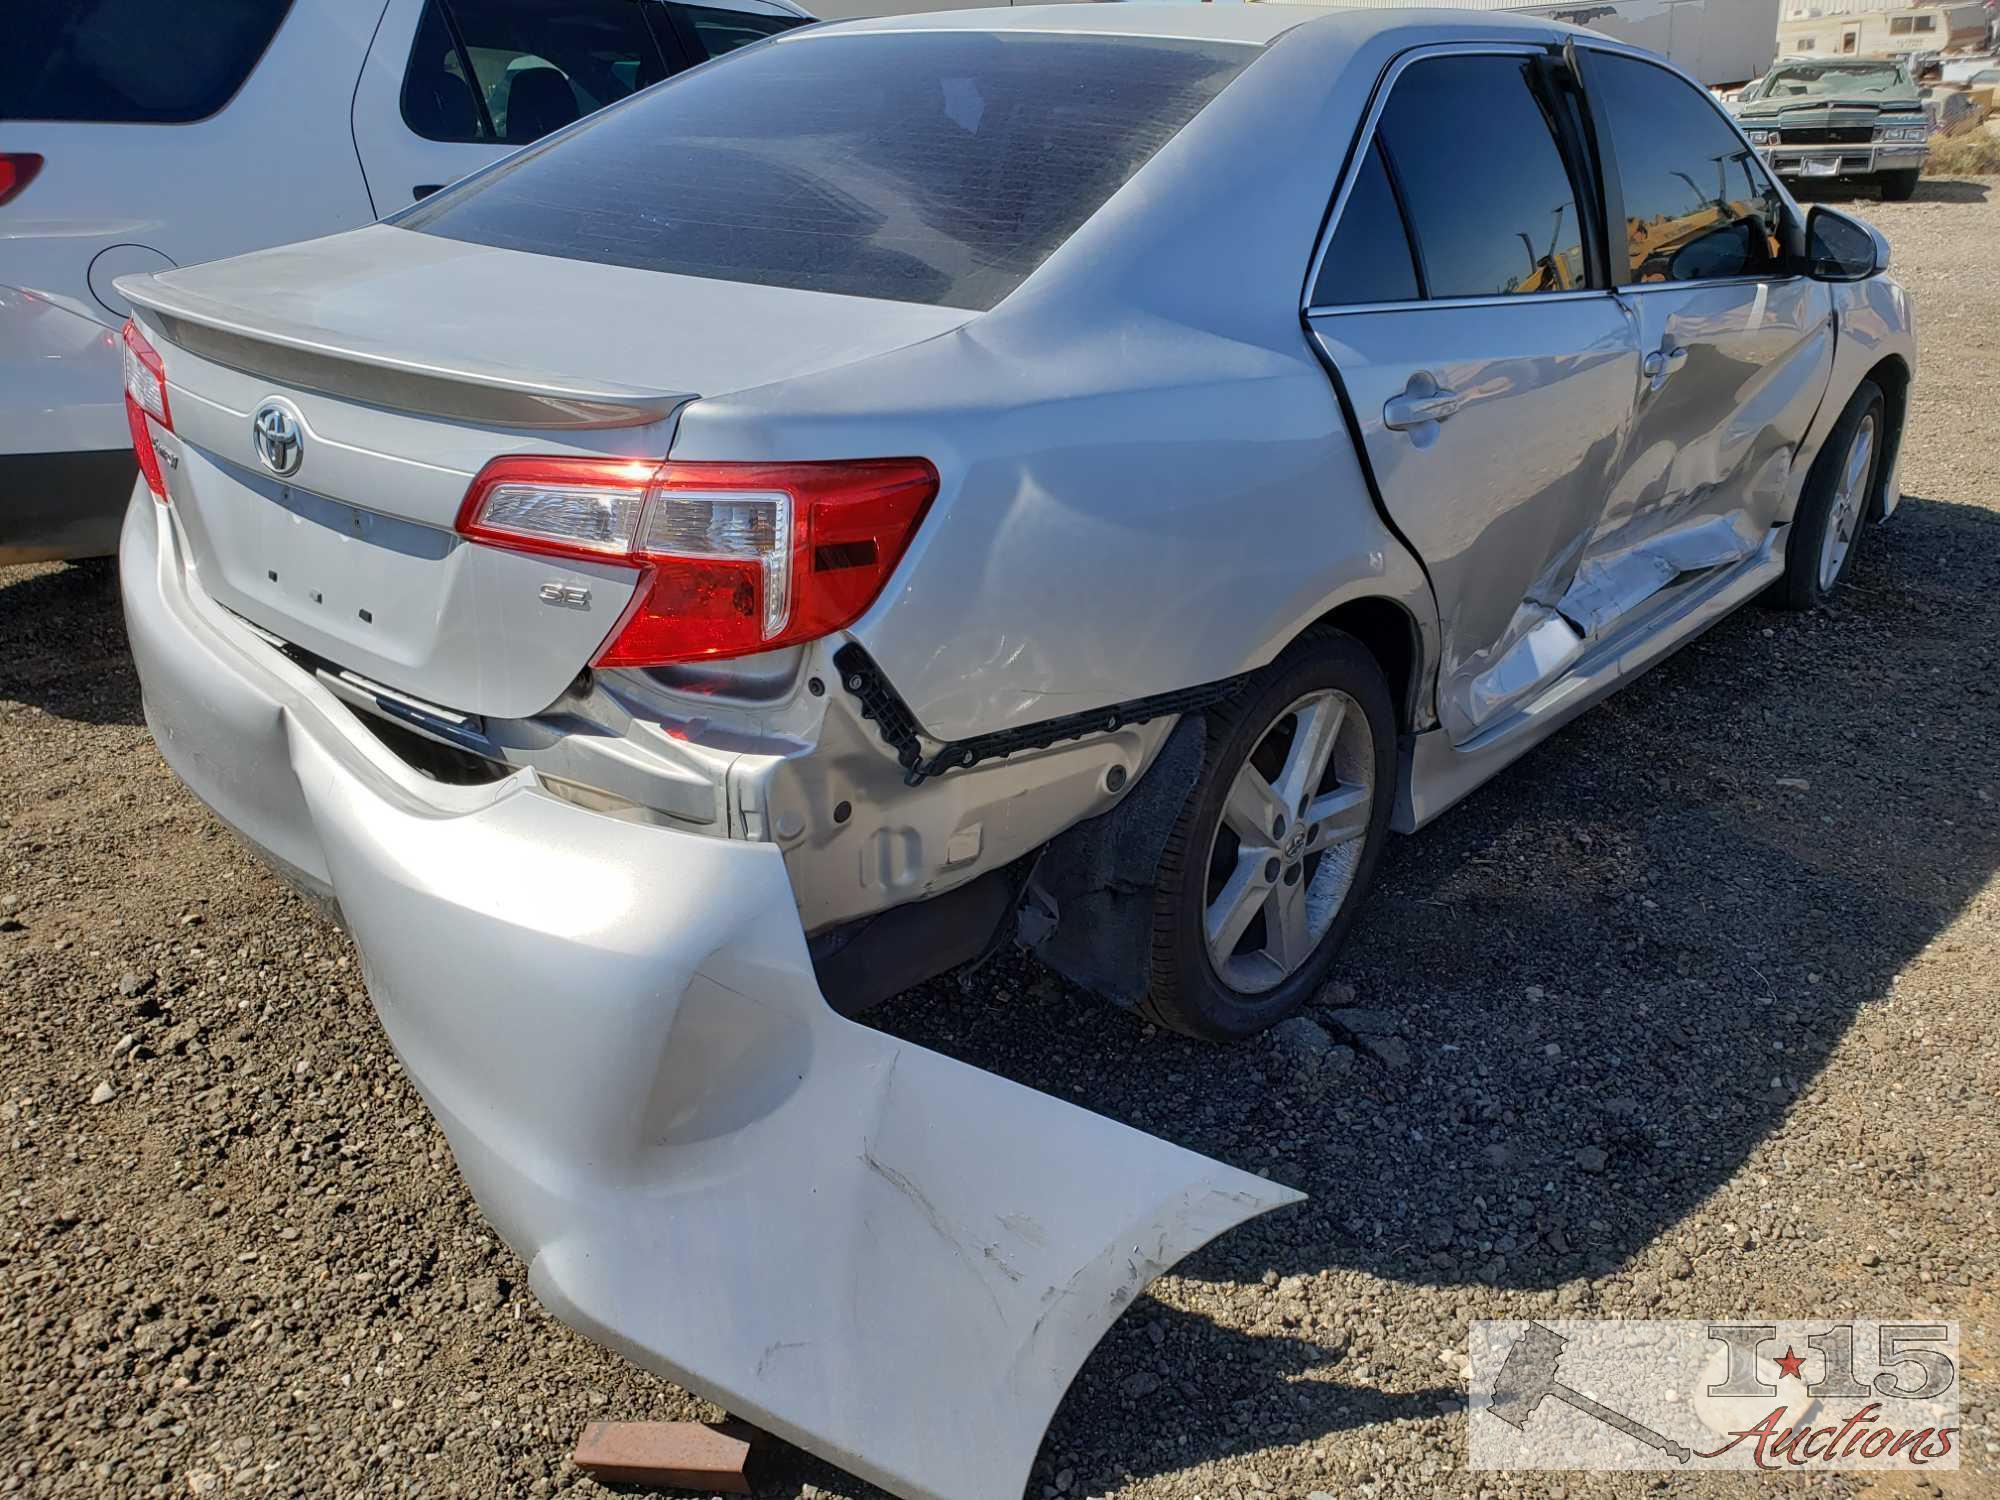 2012 Toyota Camry, Silver This will be sold on NON OP. Buyer responsible for smog